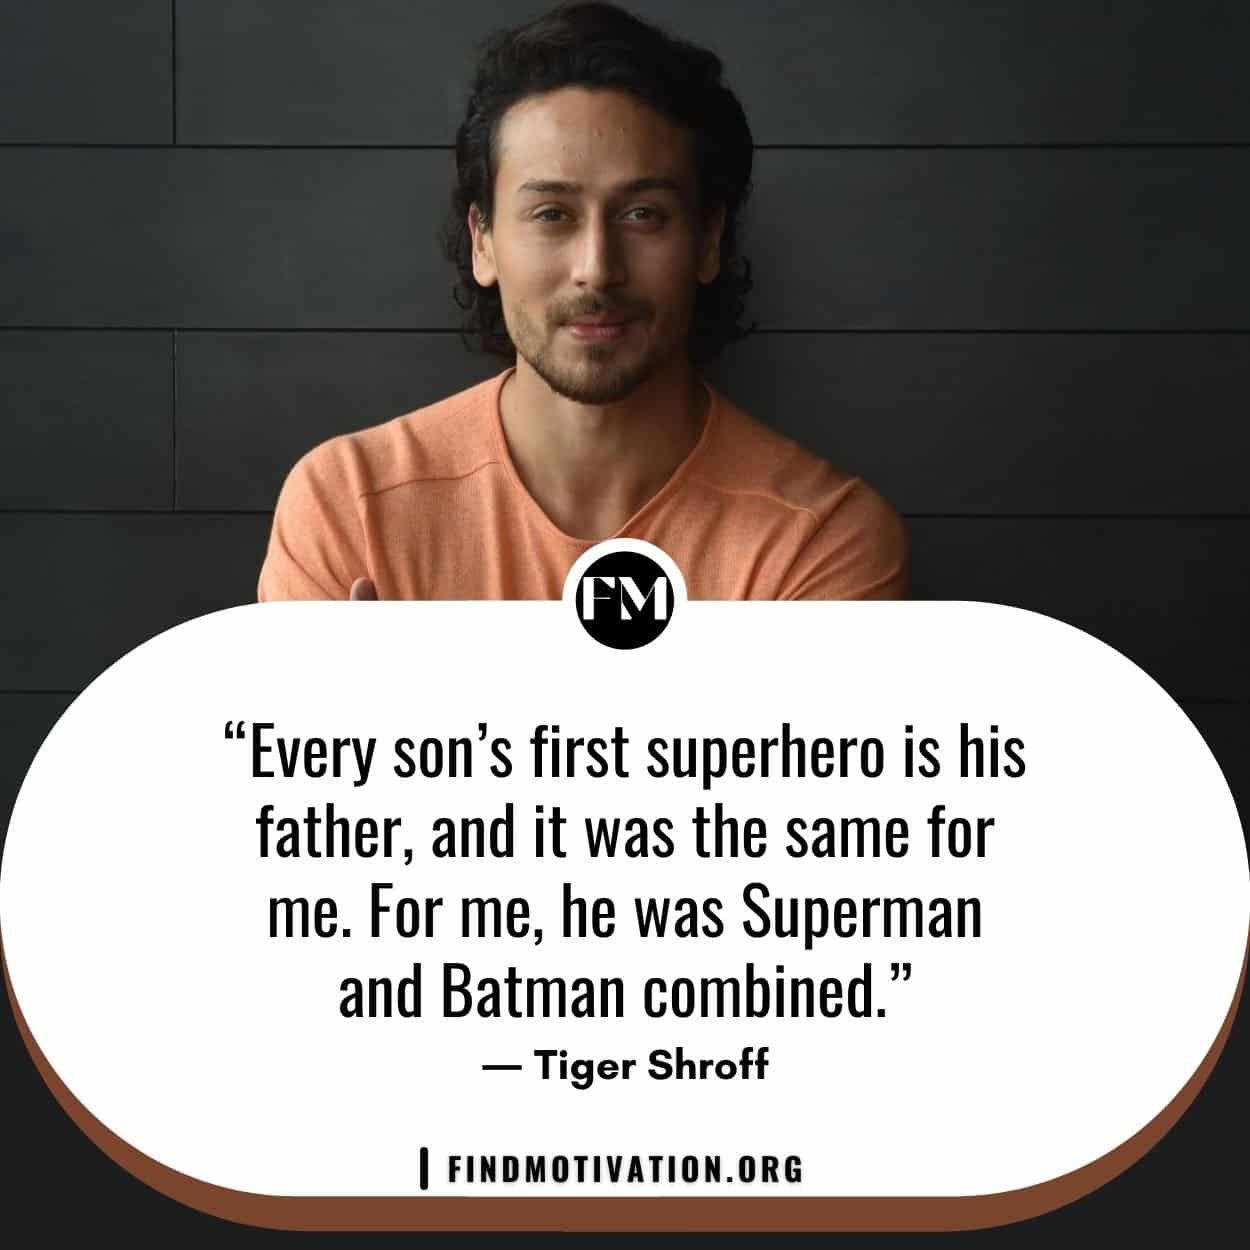 Tiger Shroff Quotes to achieve your goal